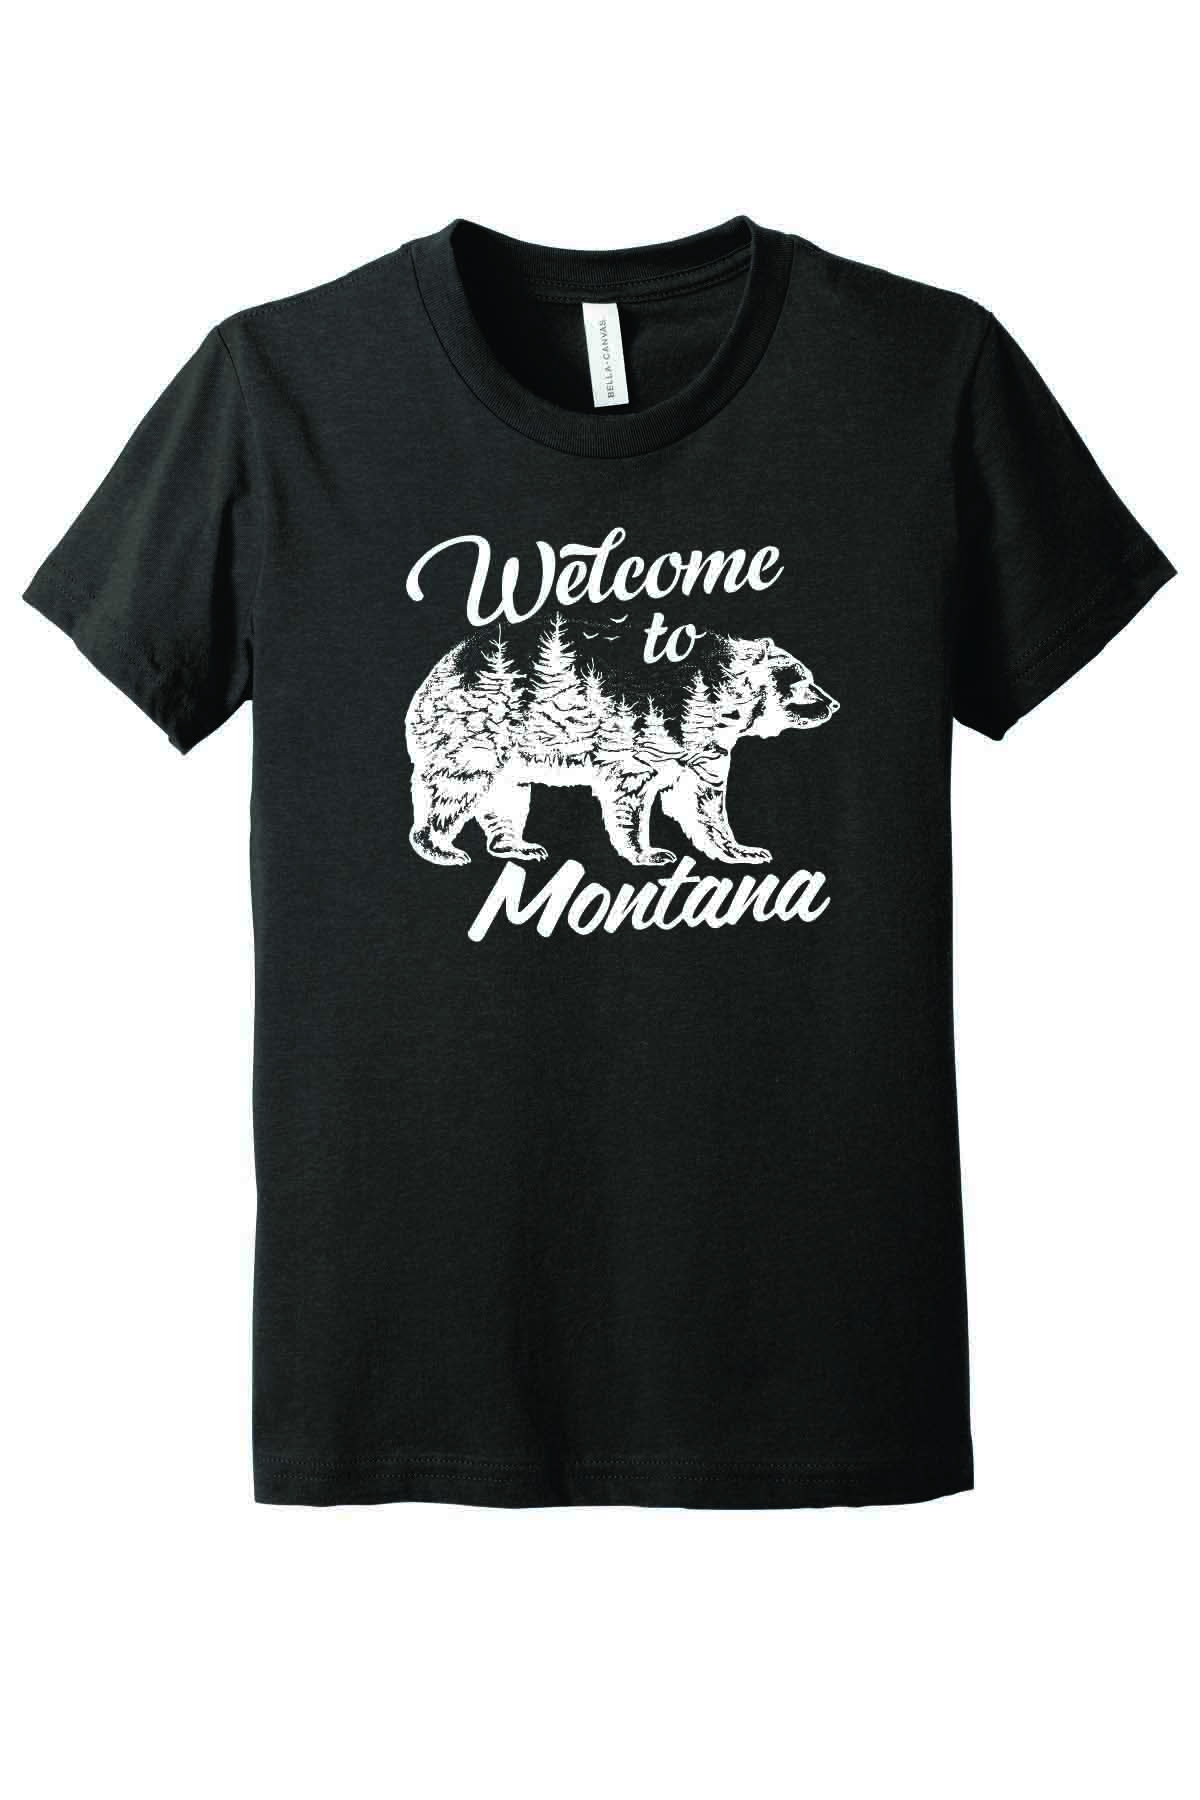 Featured image for “Tourist Tee YOUTH Welcome to MT Bear (Multiple Colors)”